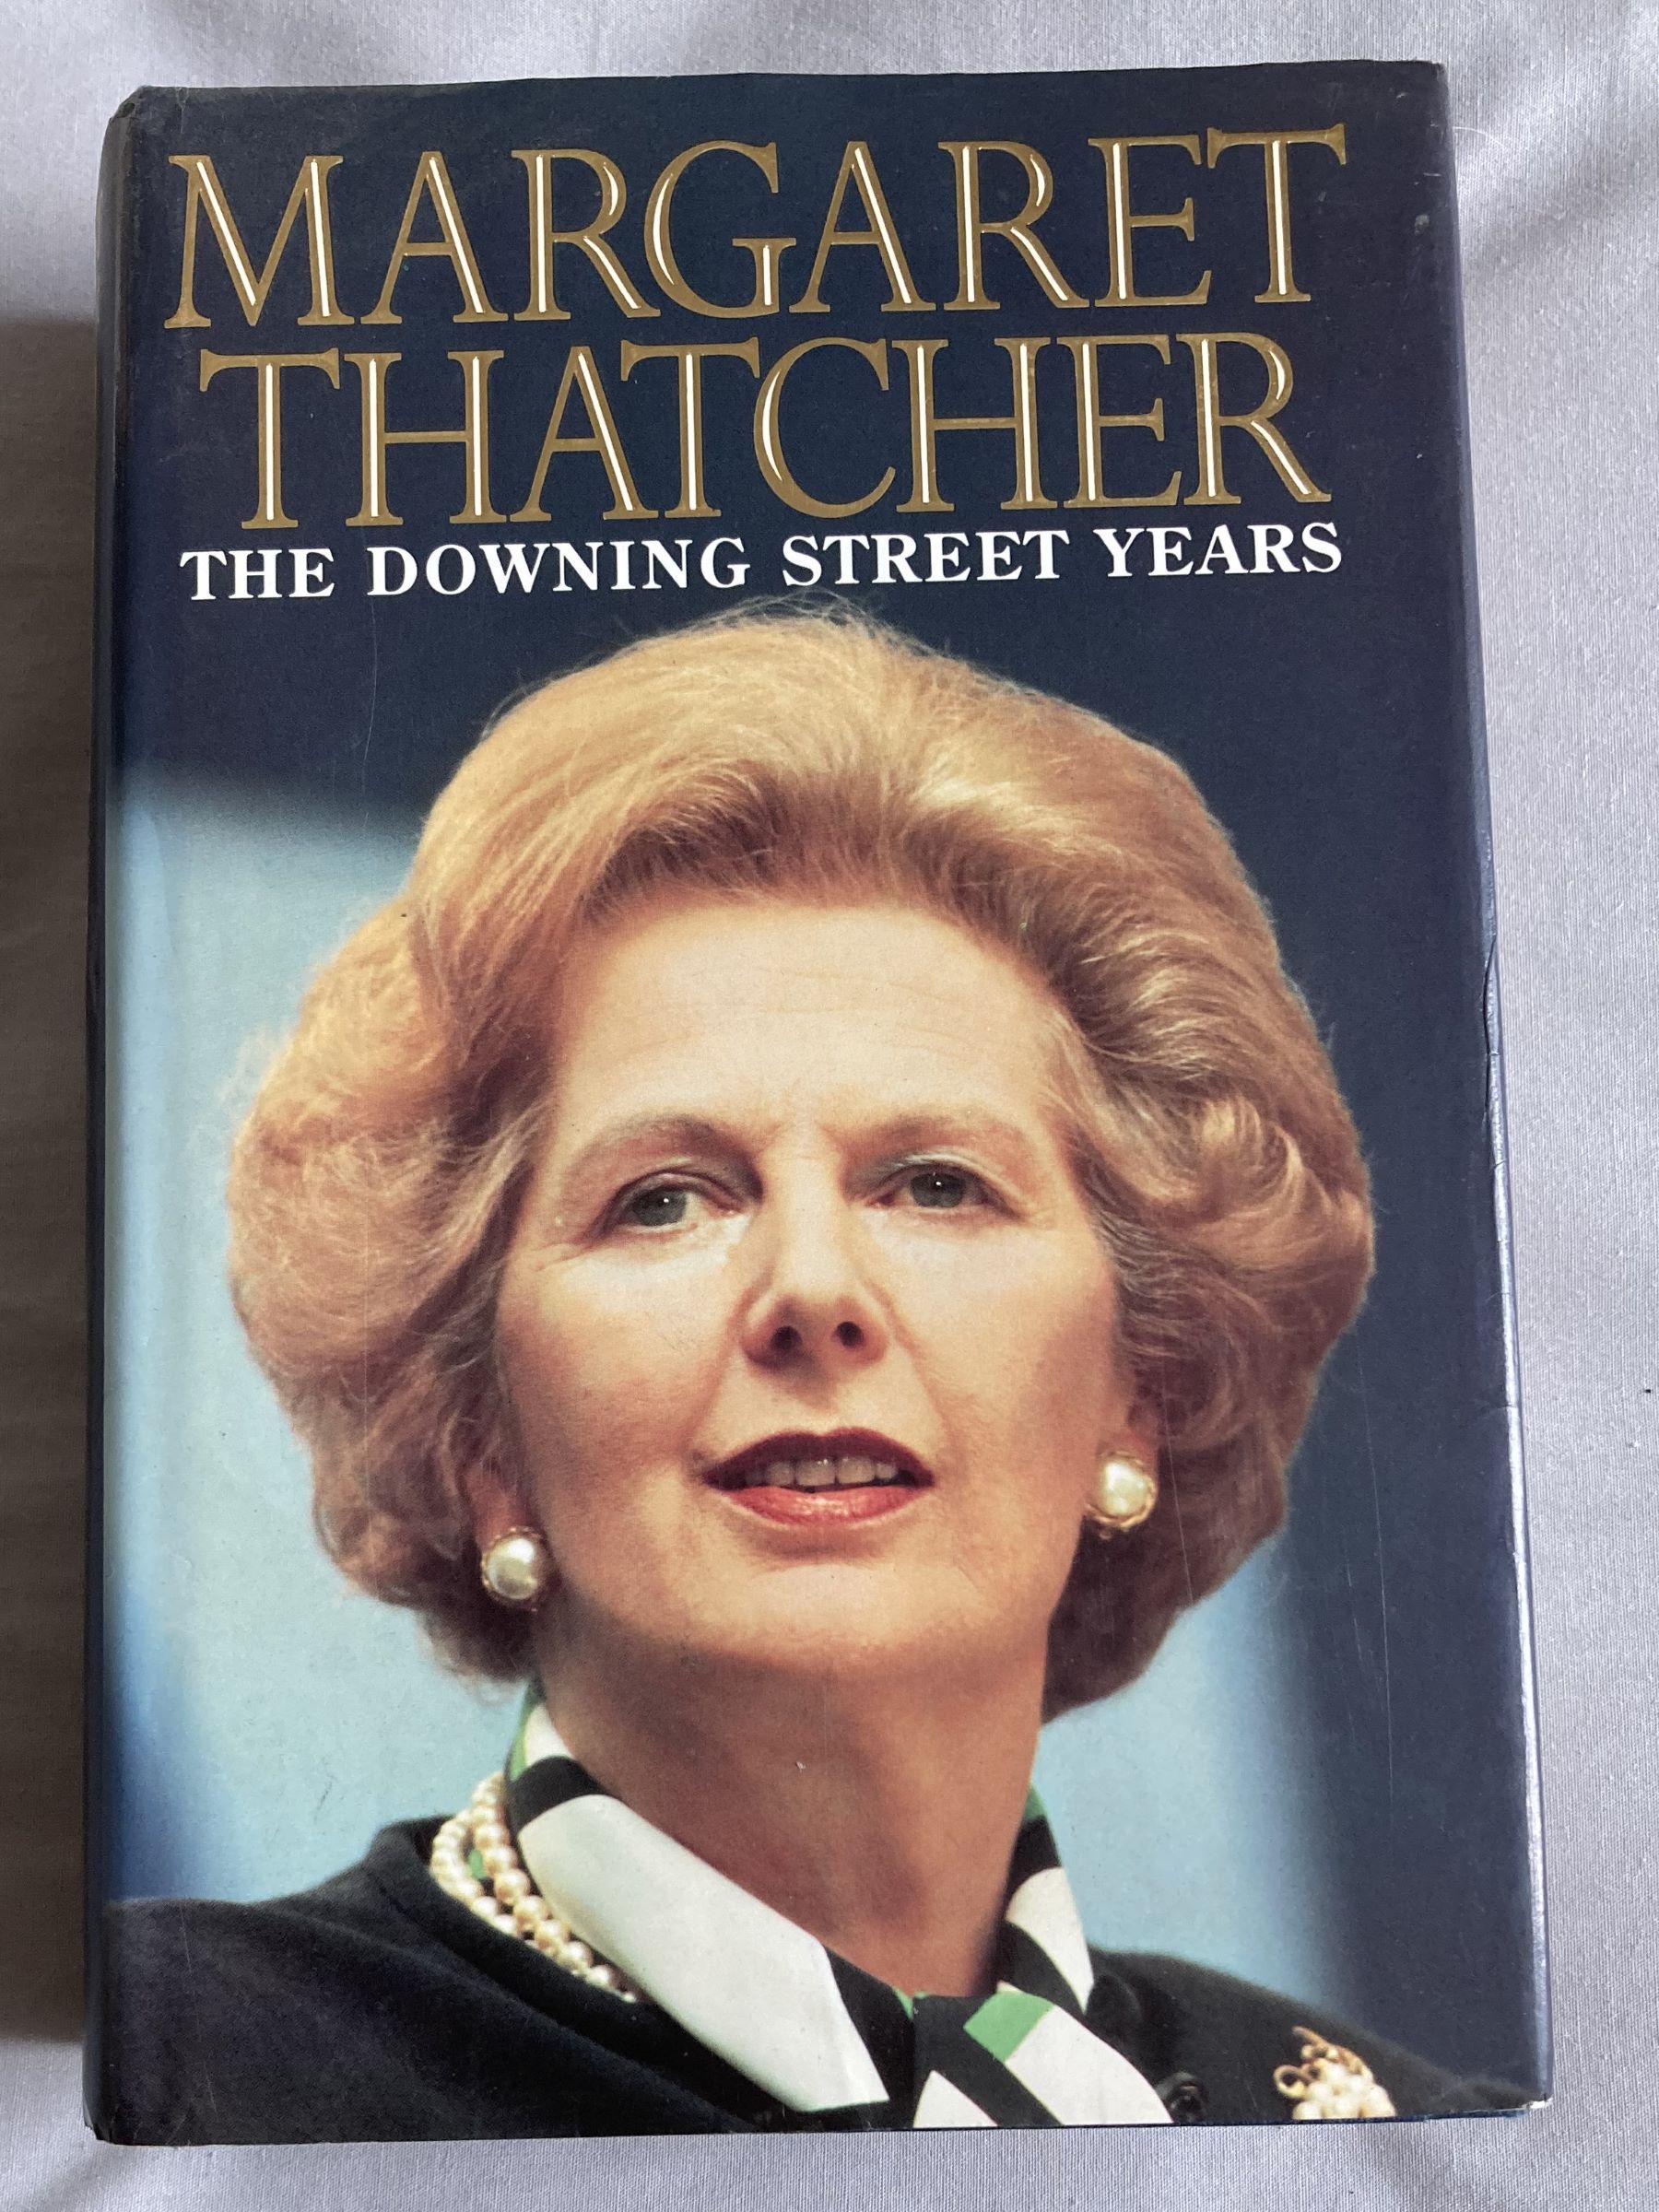 Margaret Thatcher signed bookplate fixed inside hardback book, The Downing Street Years. Good